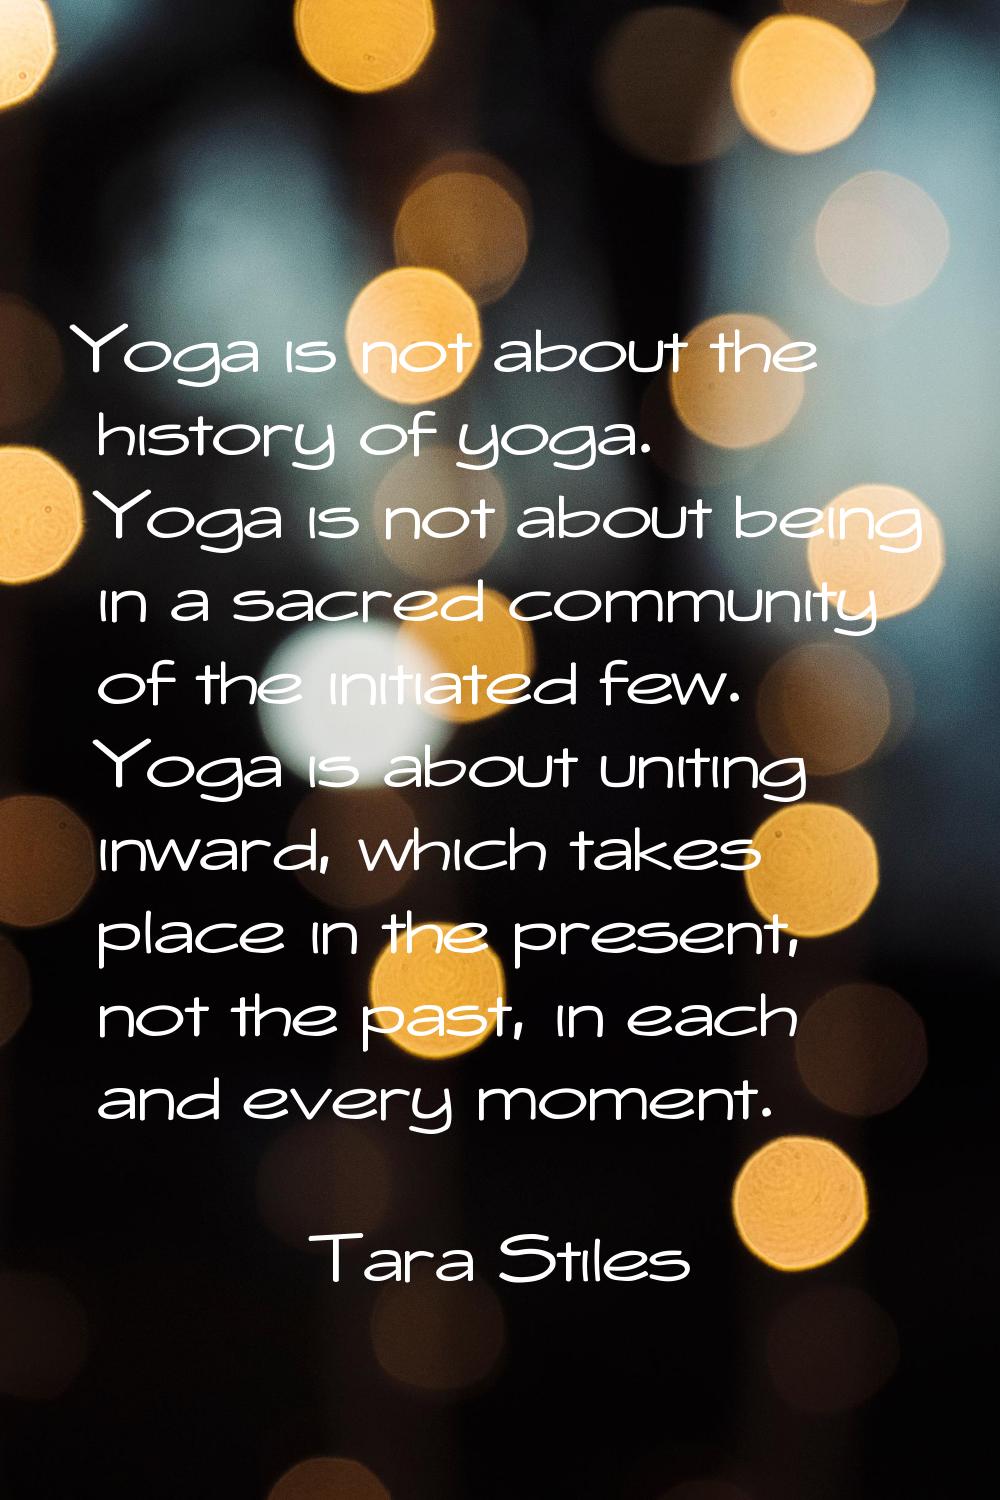 Yoga is not about the history of yoga. Yoga is not about being in a sacred community of the initiat